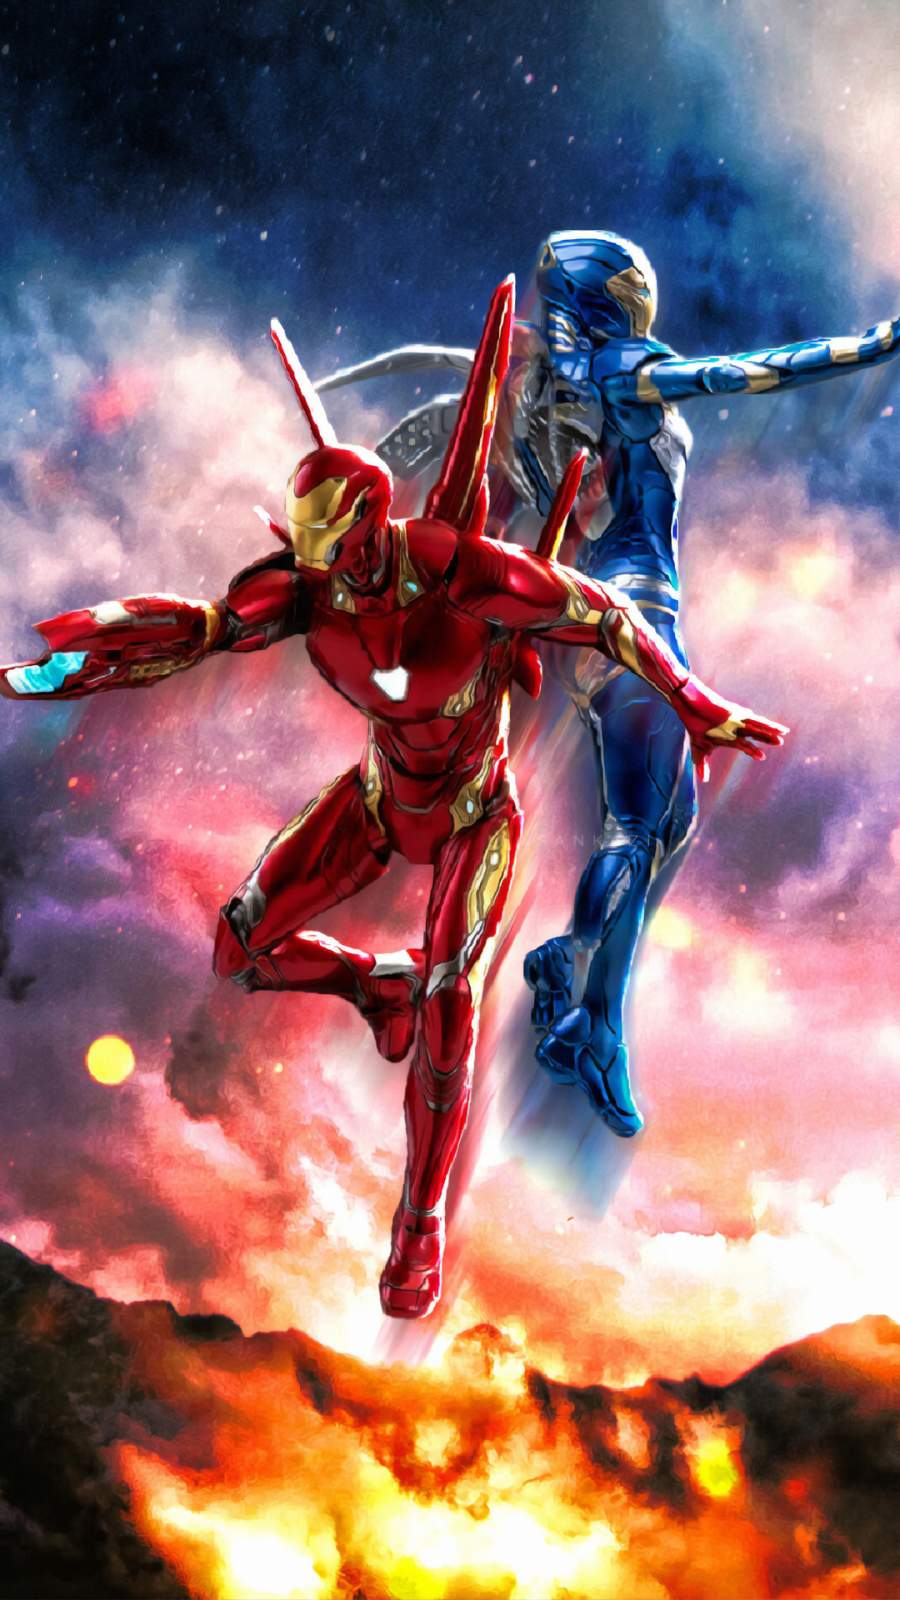 Iron Man and Pepper Potts Rescue Suit iPhone Wallpaper Wallpaper, iPhone Wallpaper